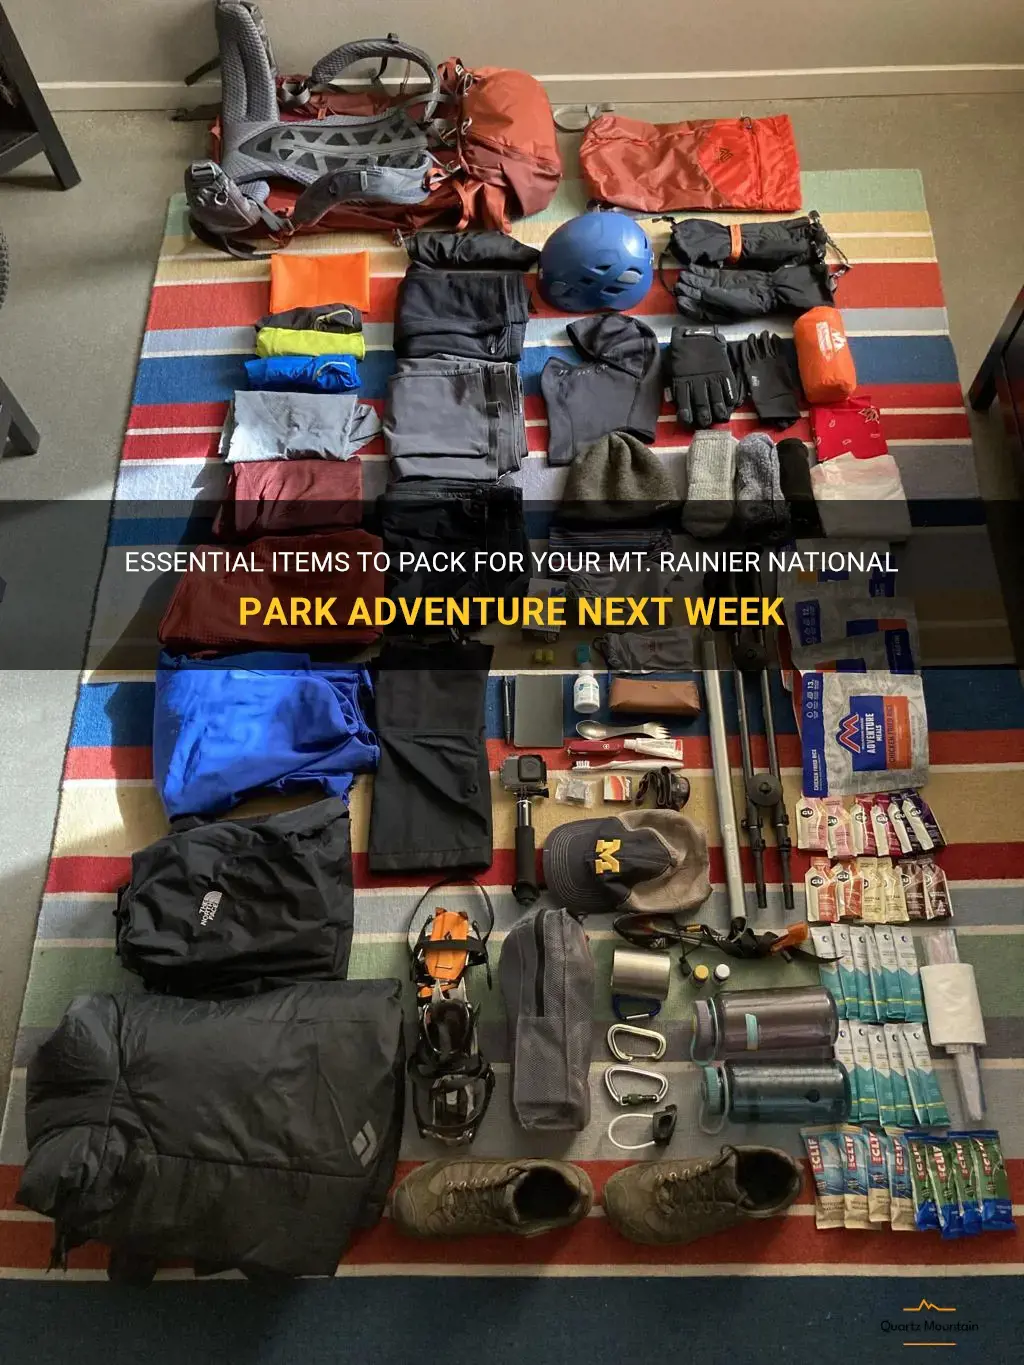 what to pack for mt rainier national park next week